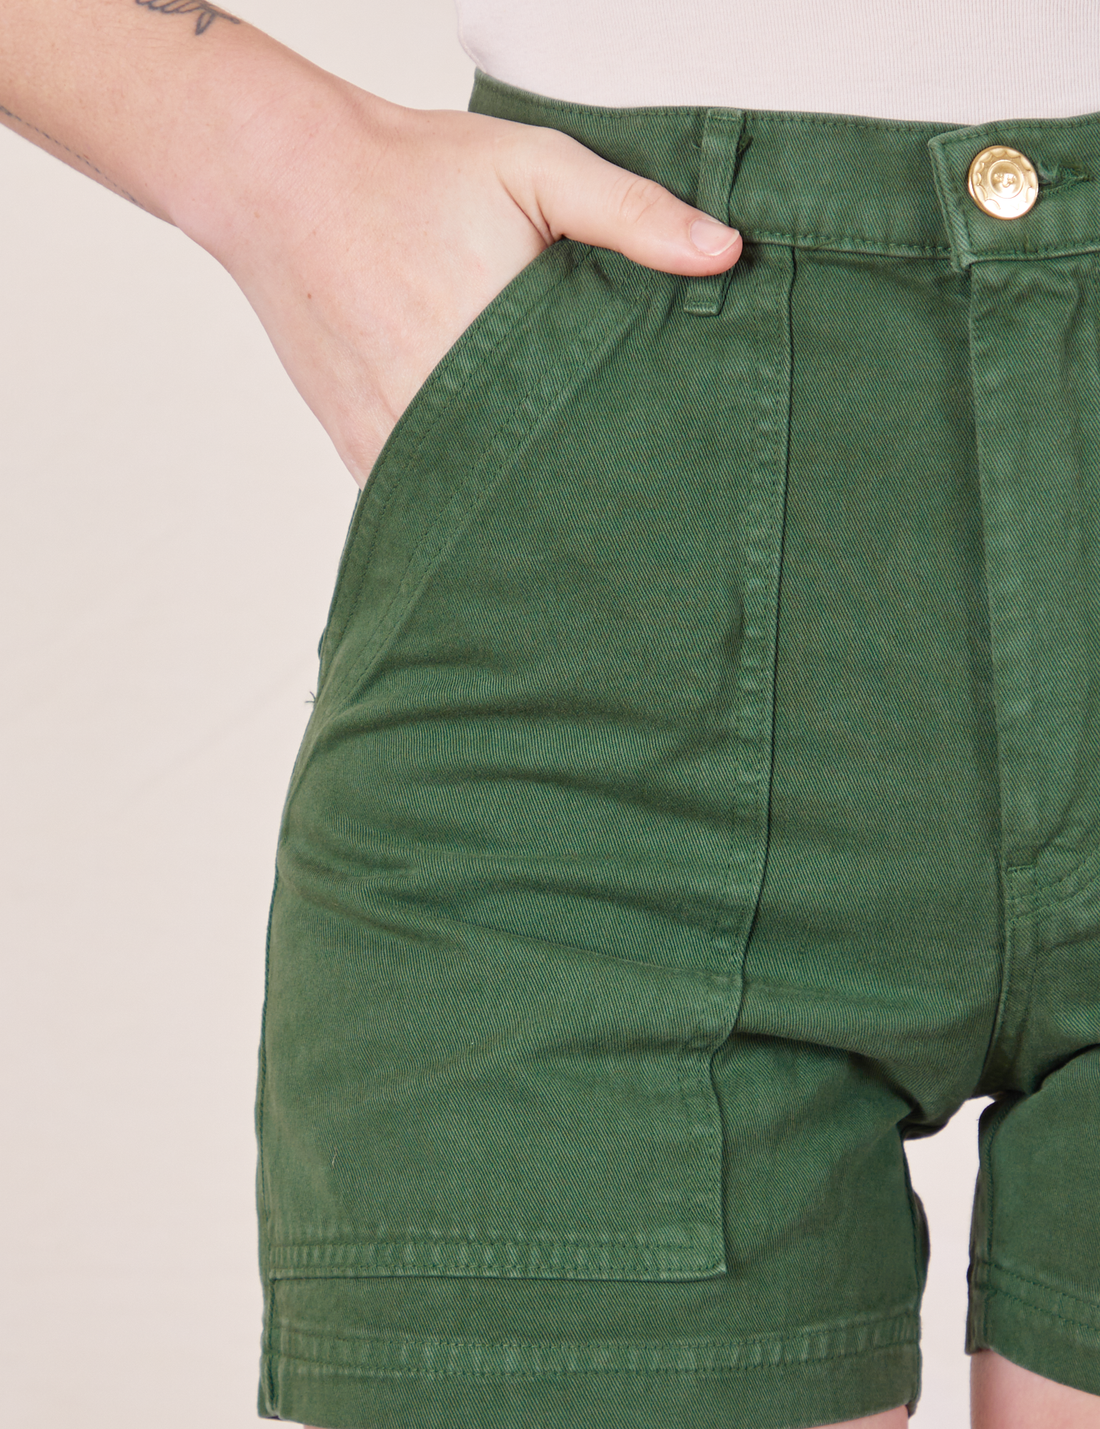 Classic Work Shorts in Dark Emerald Green front pocket close up. Alex has her hand in the pocket.